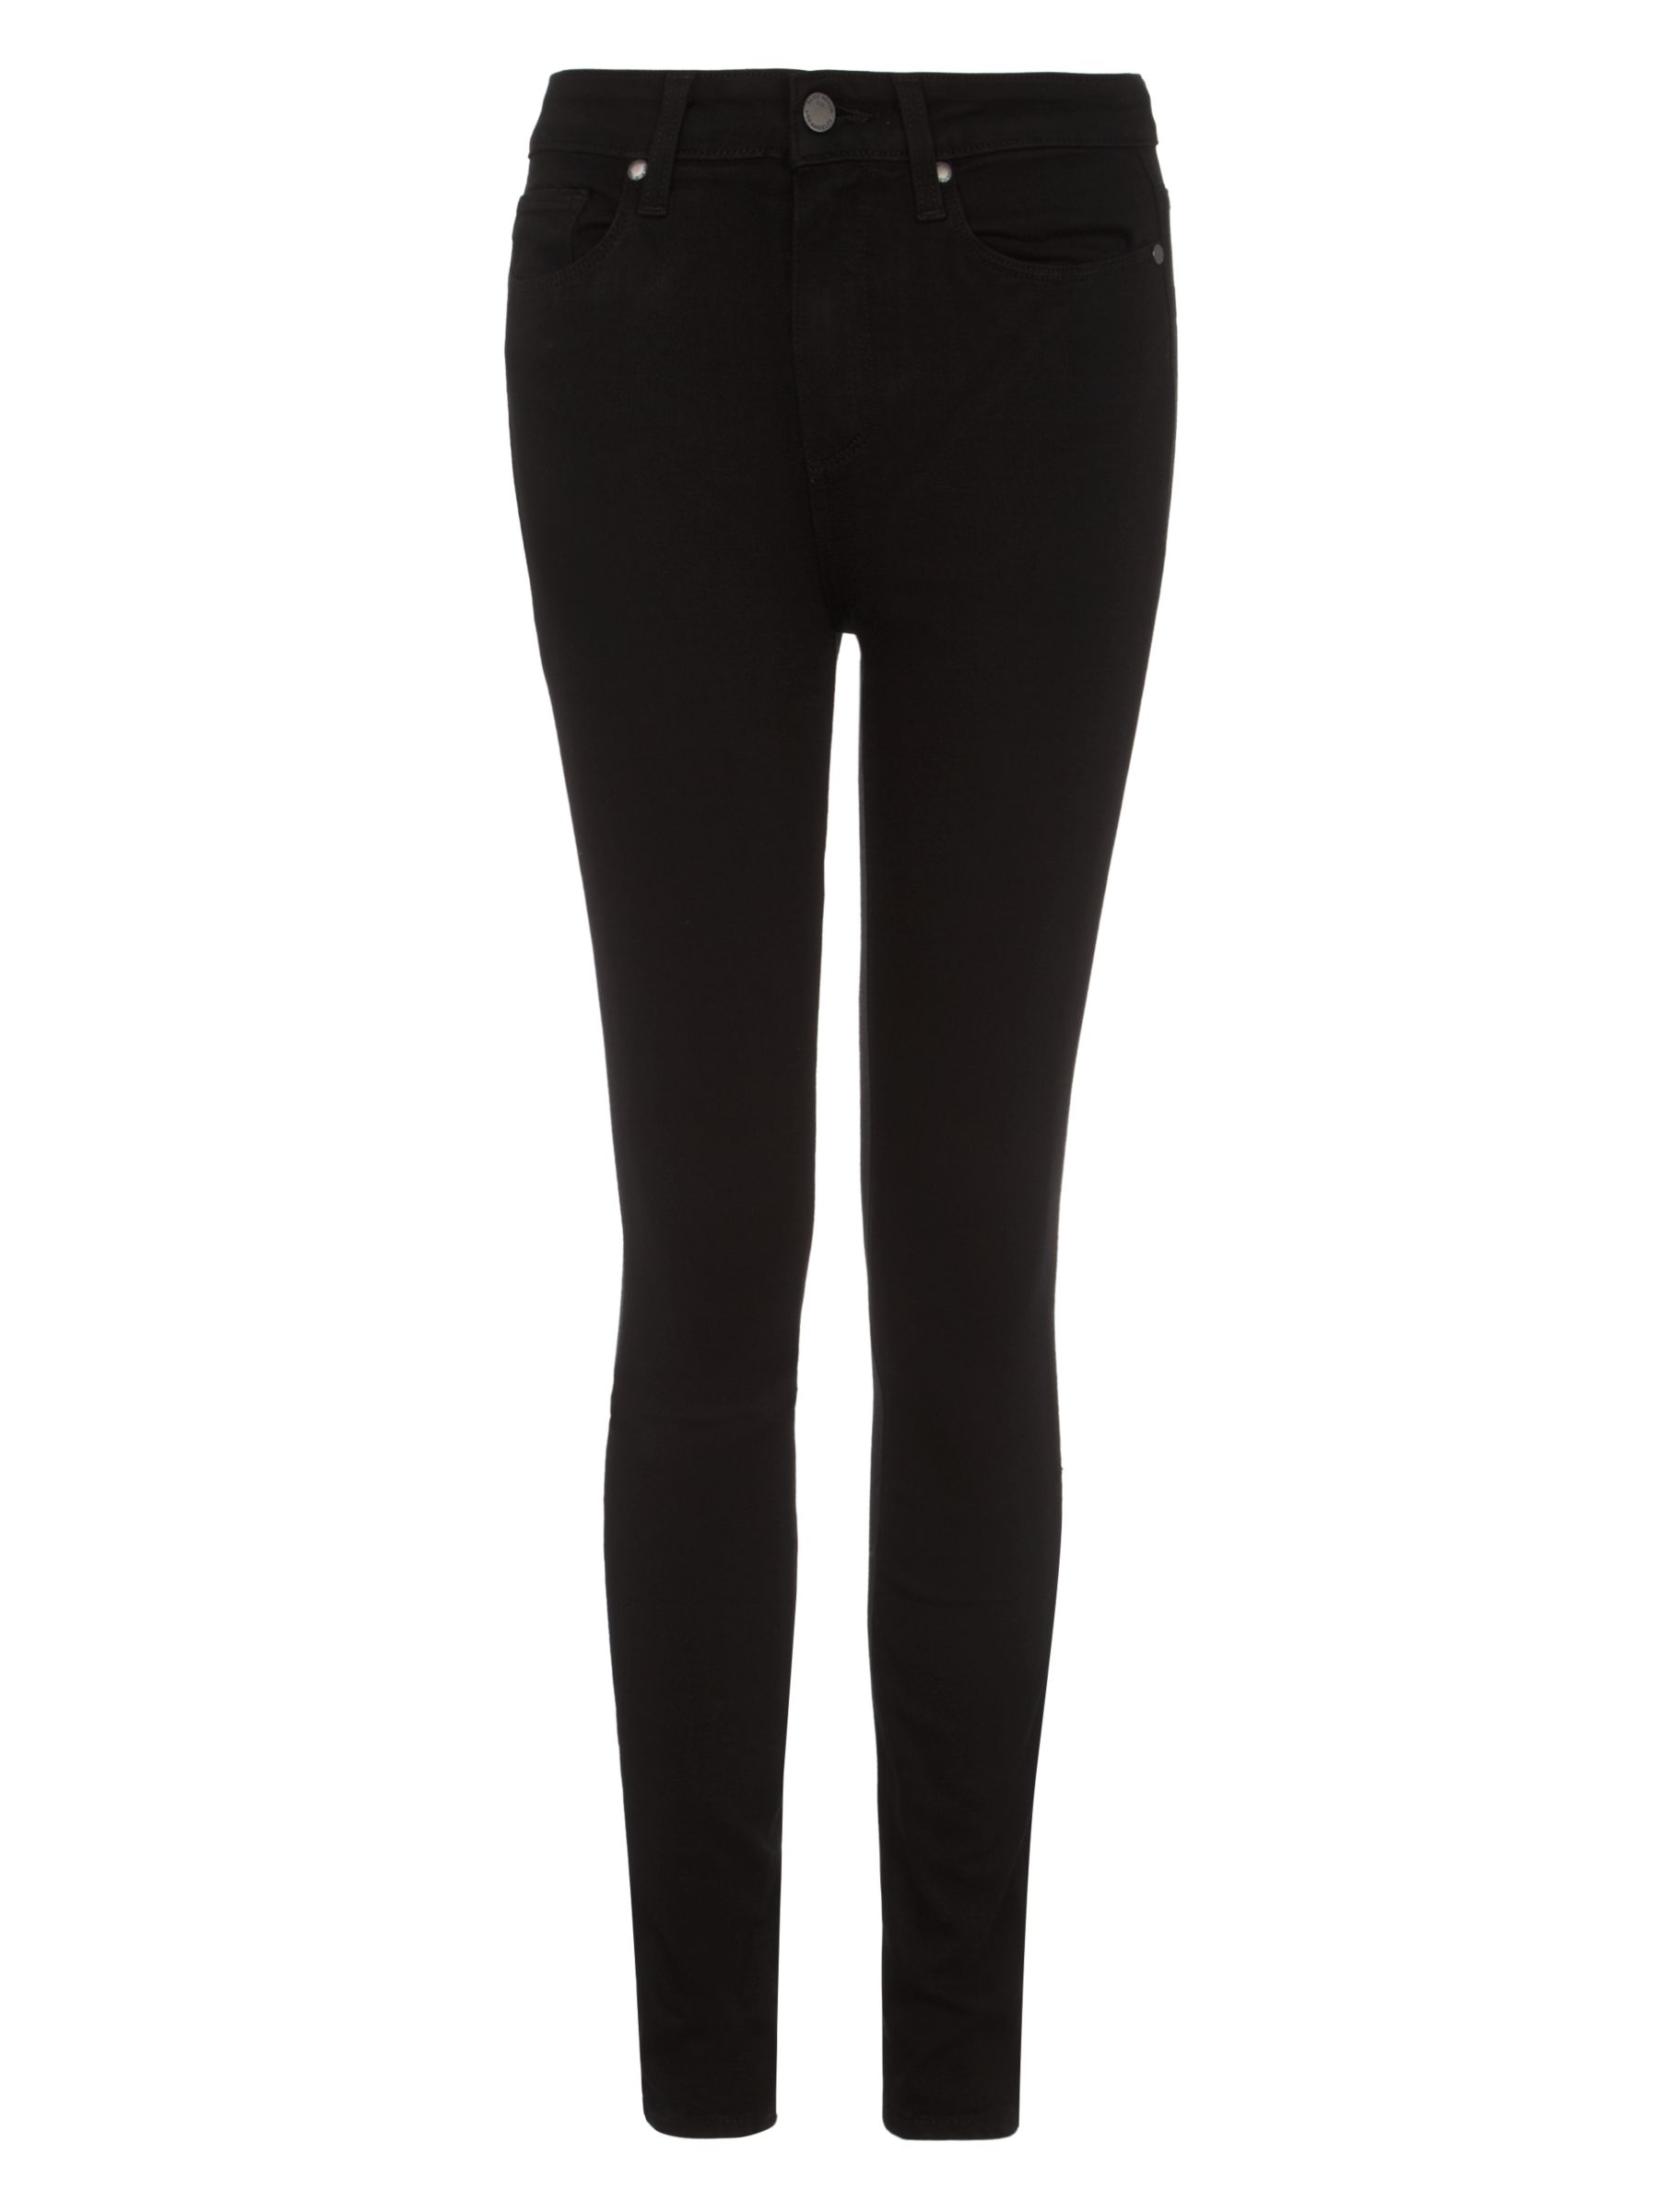 PAIGE Margot High Rise Ultra Skinny Jeans, Black Shadow, 25